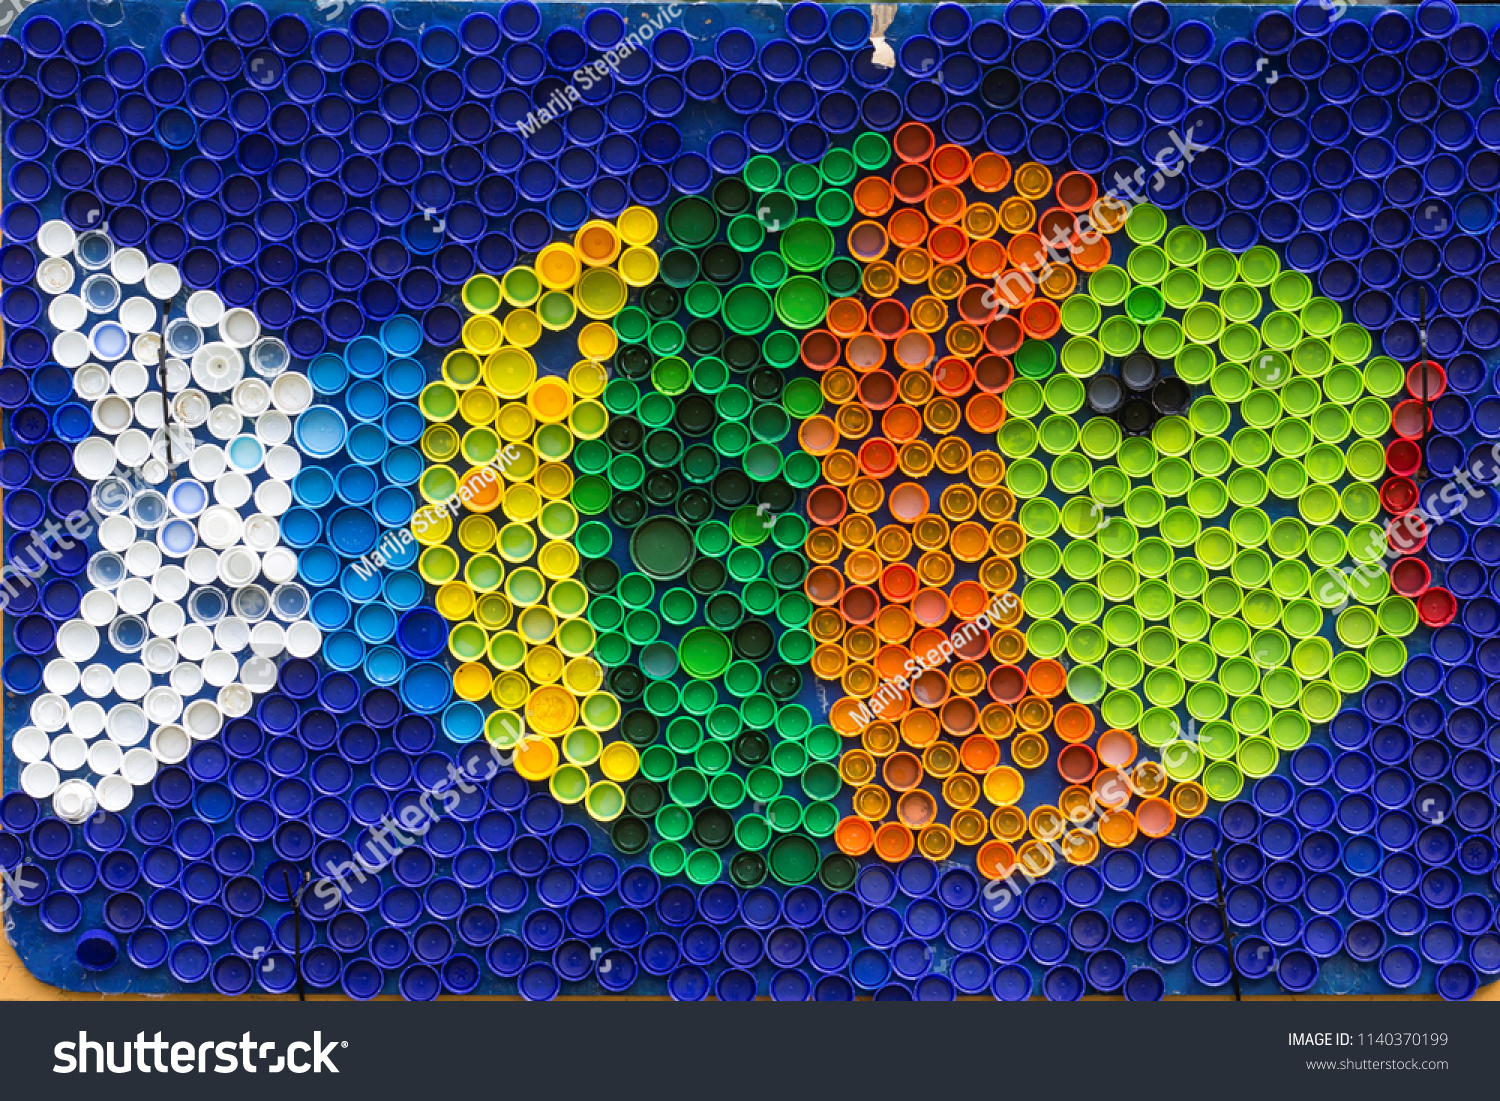 Fish mosaic decoration made of colorful plastic bottle caps . Summer season and travel concept. Handmade crafts. Recycling art. #1140370199